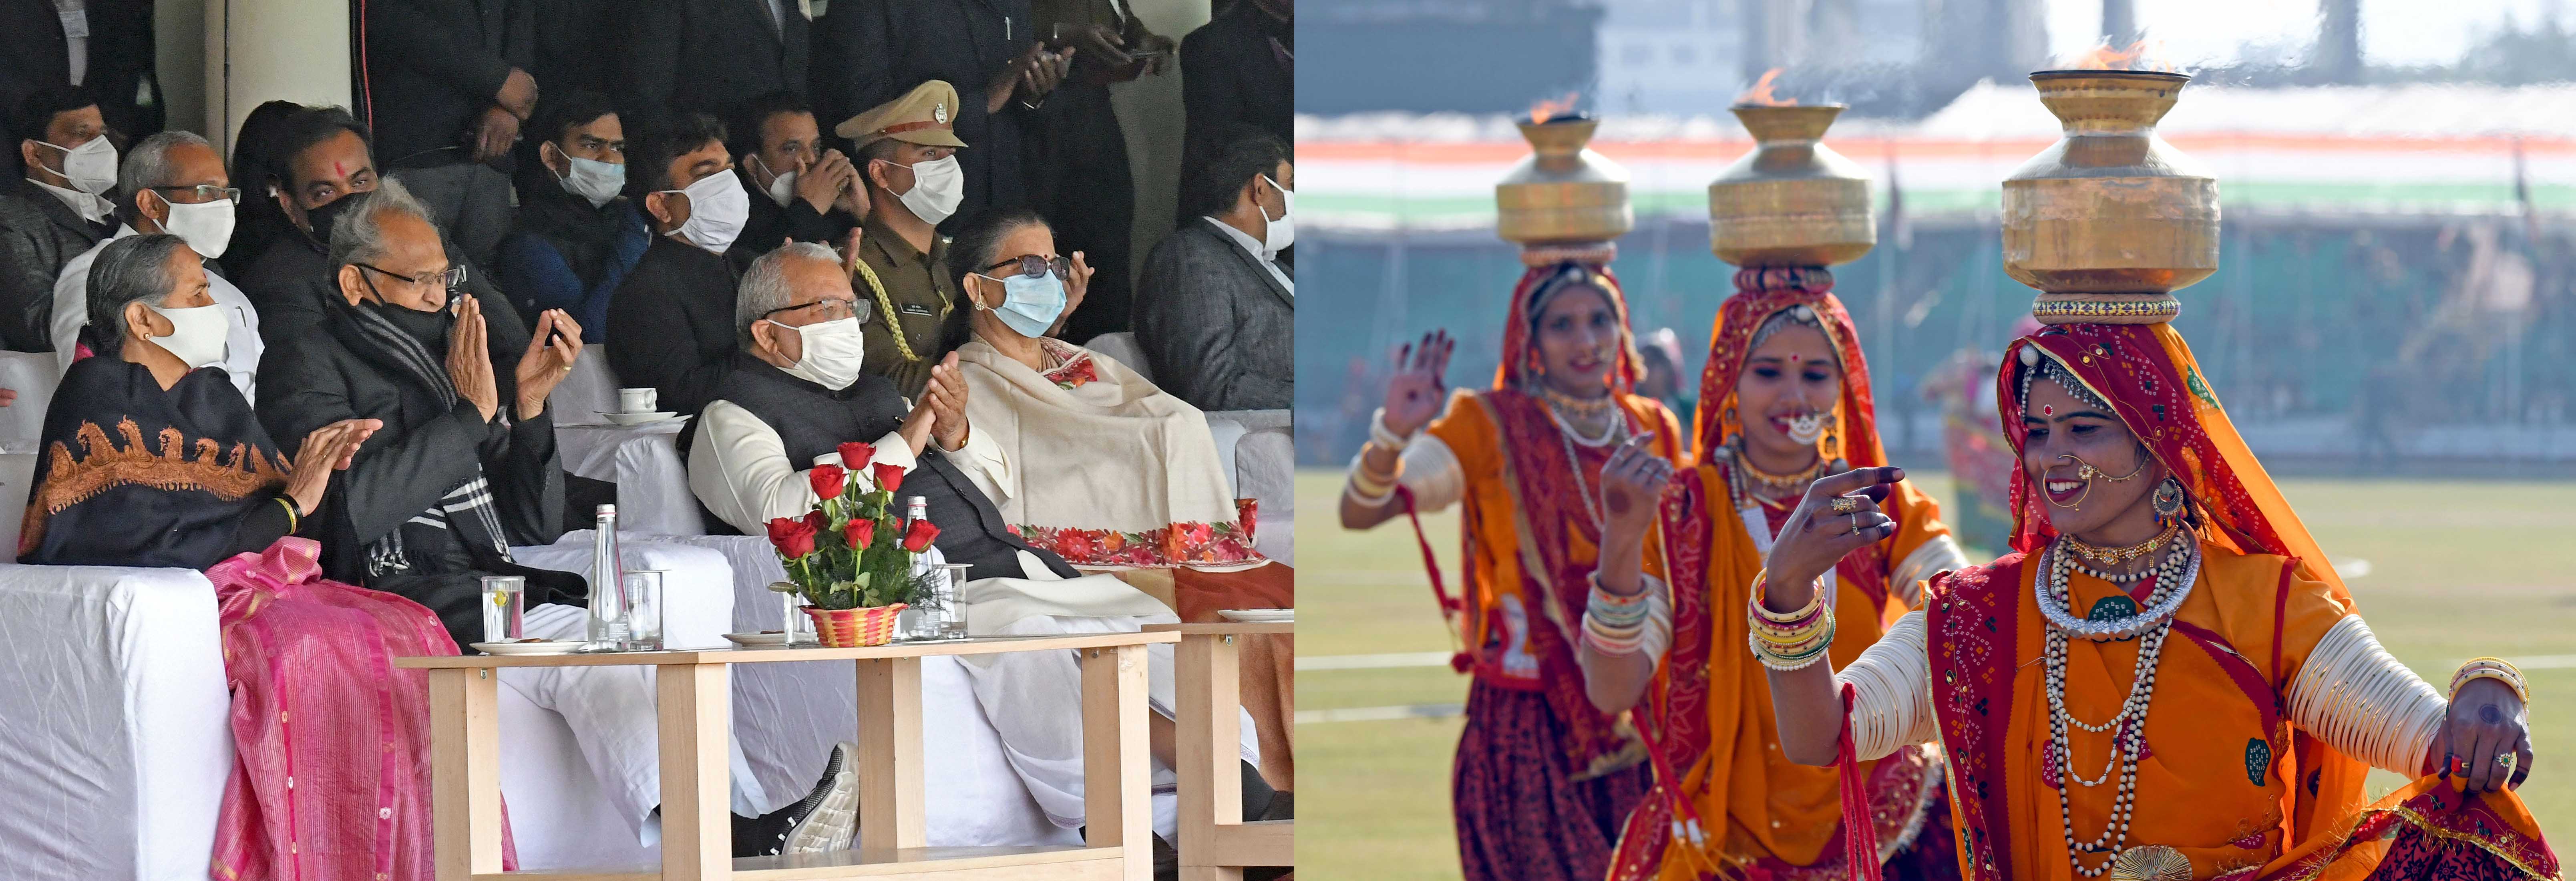 Hon’ble Governor along with the Hon’ble Chief Minister witnesses a series of cultural Performances at the Republic Day celebration 2021